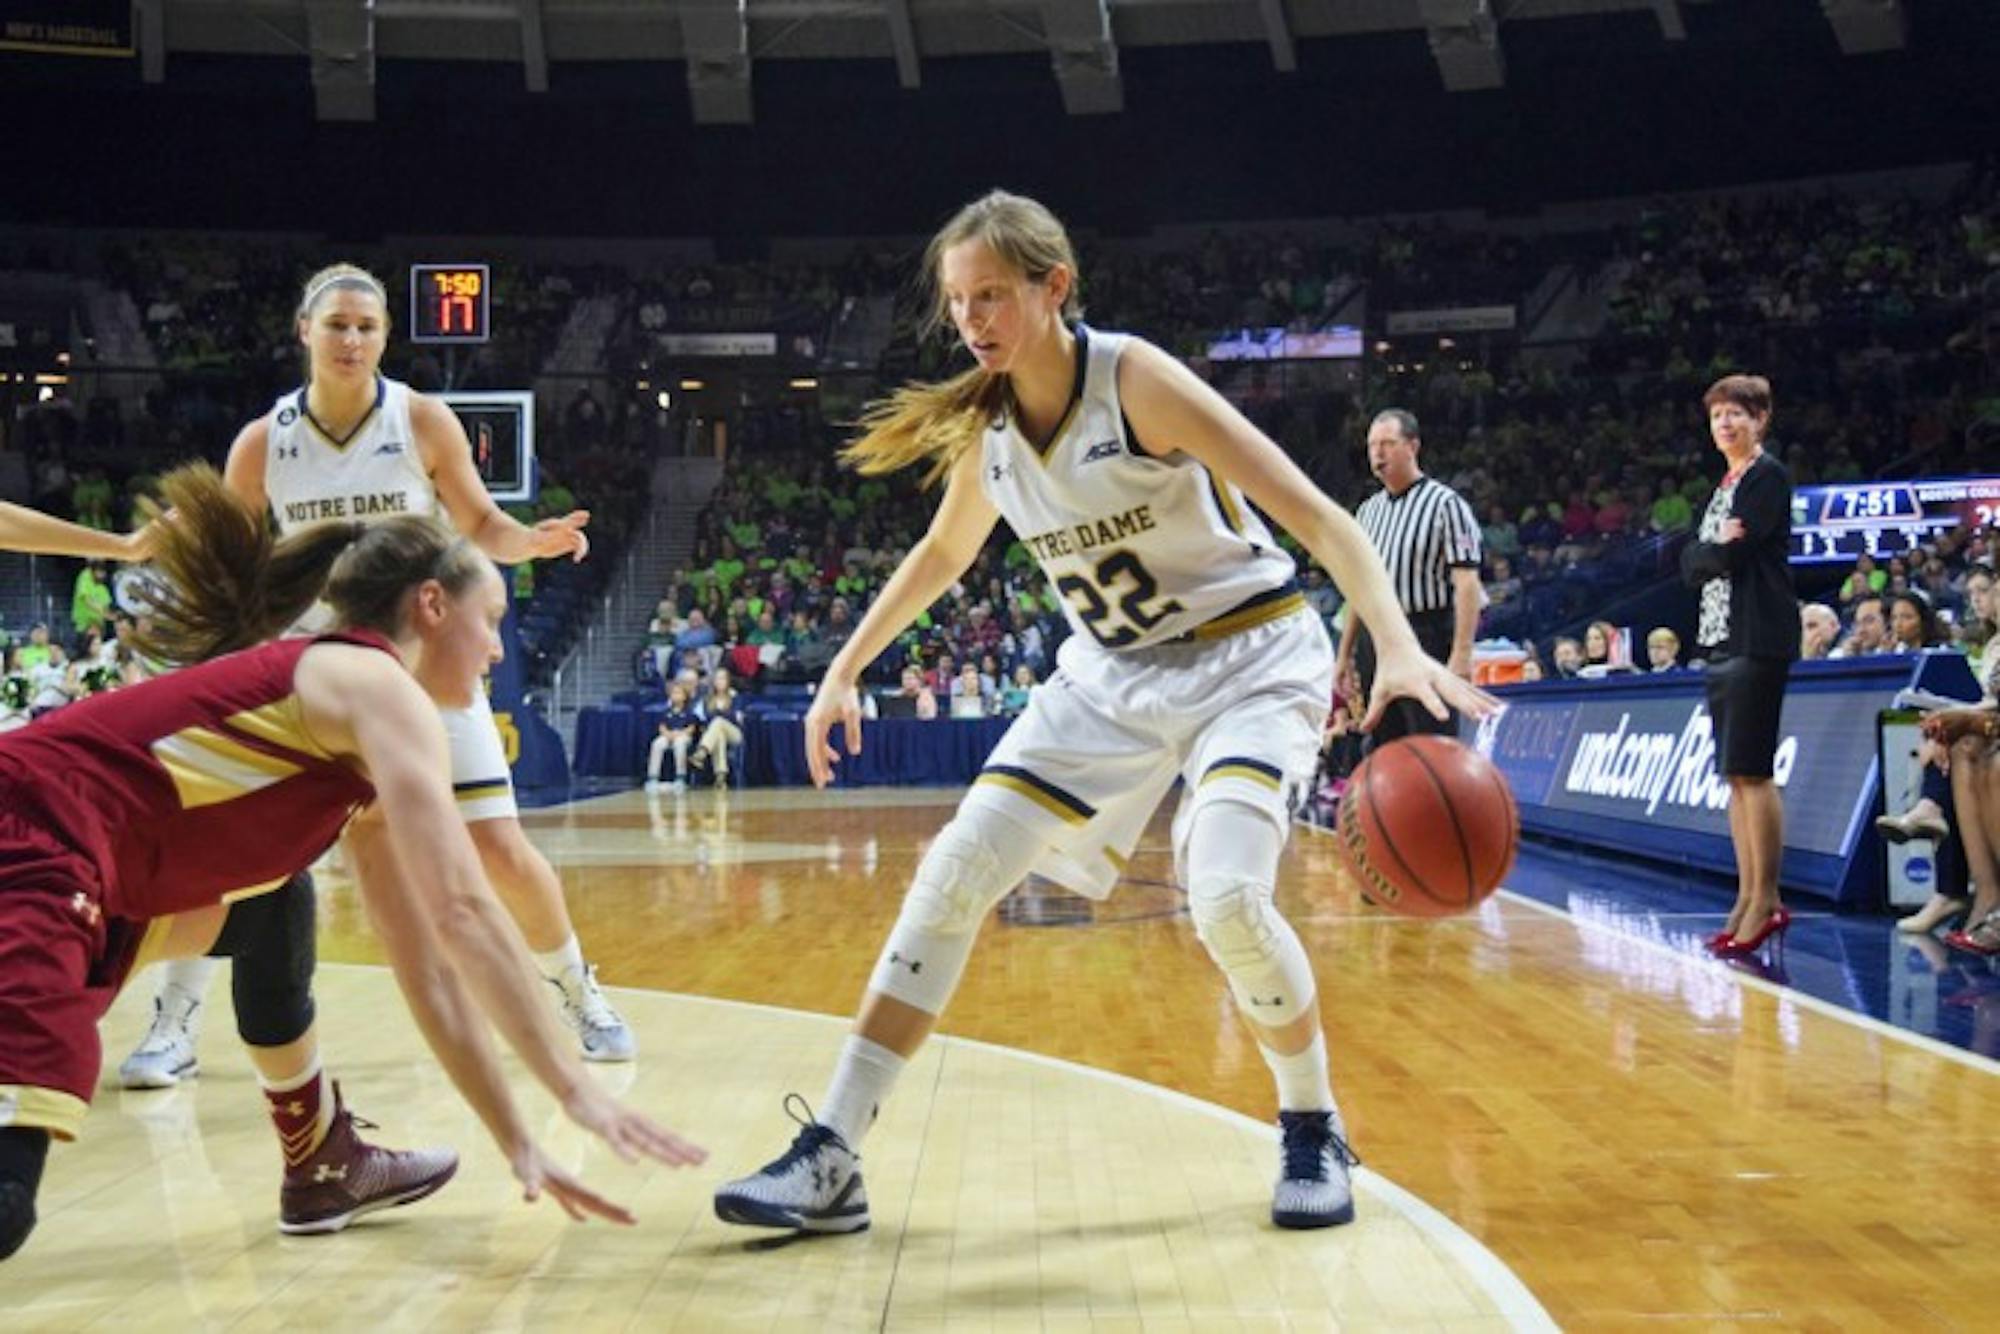 Graduate student guard Madison Cable steps behind the line during Notre Dame’s 70-58 win over Boston College on Feb. 27.